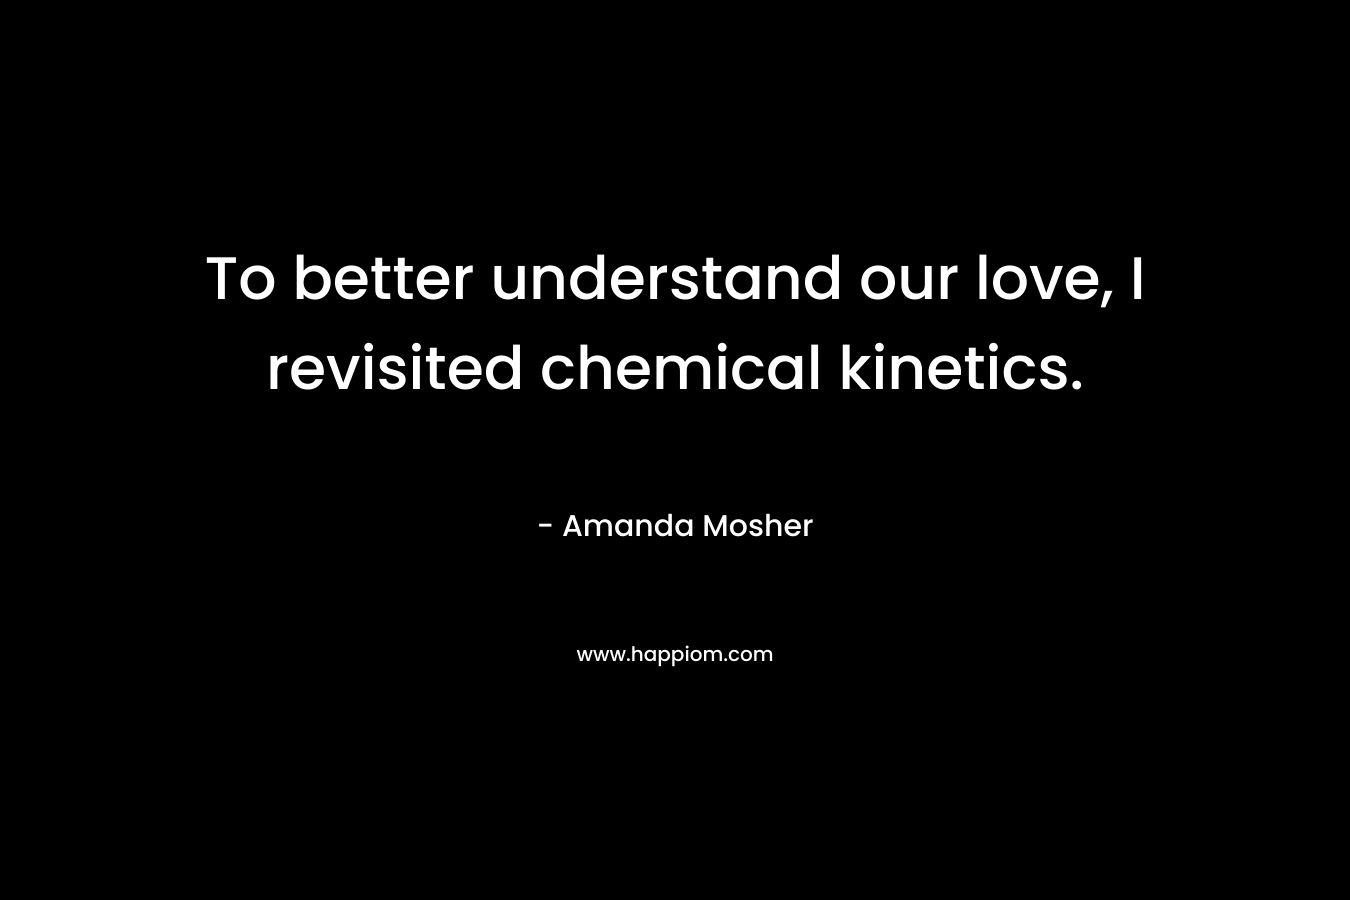 To better understand our love, I revisited chemical kinetics. – Amanda Mosher